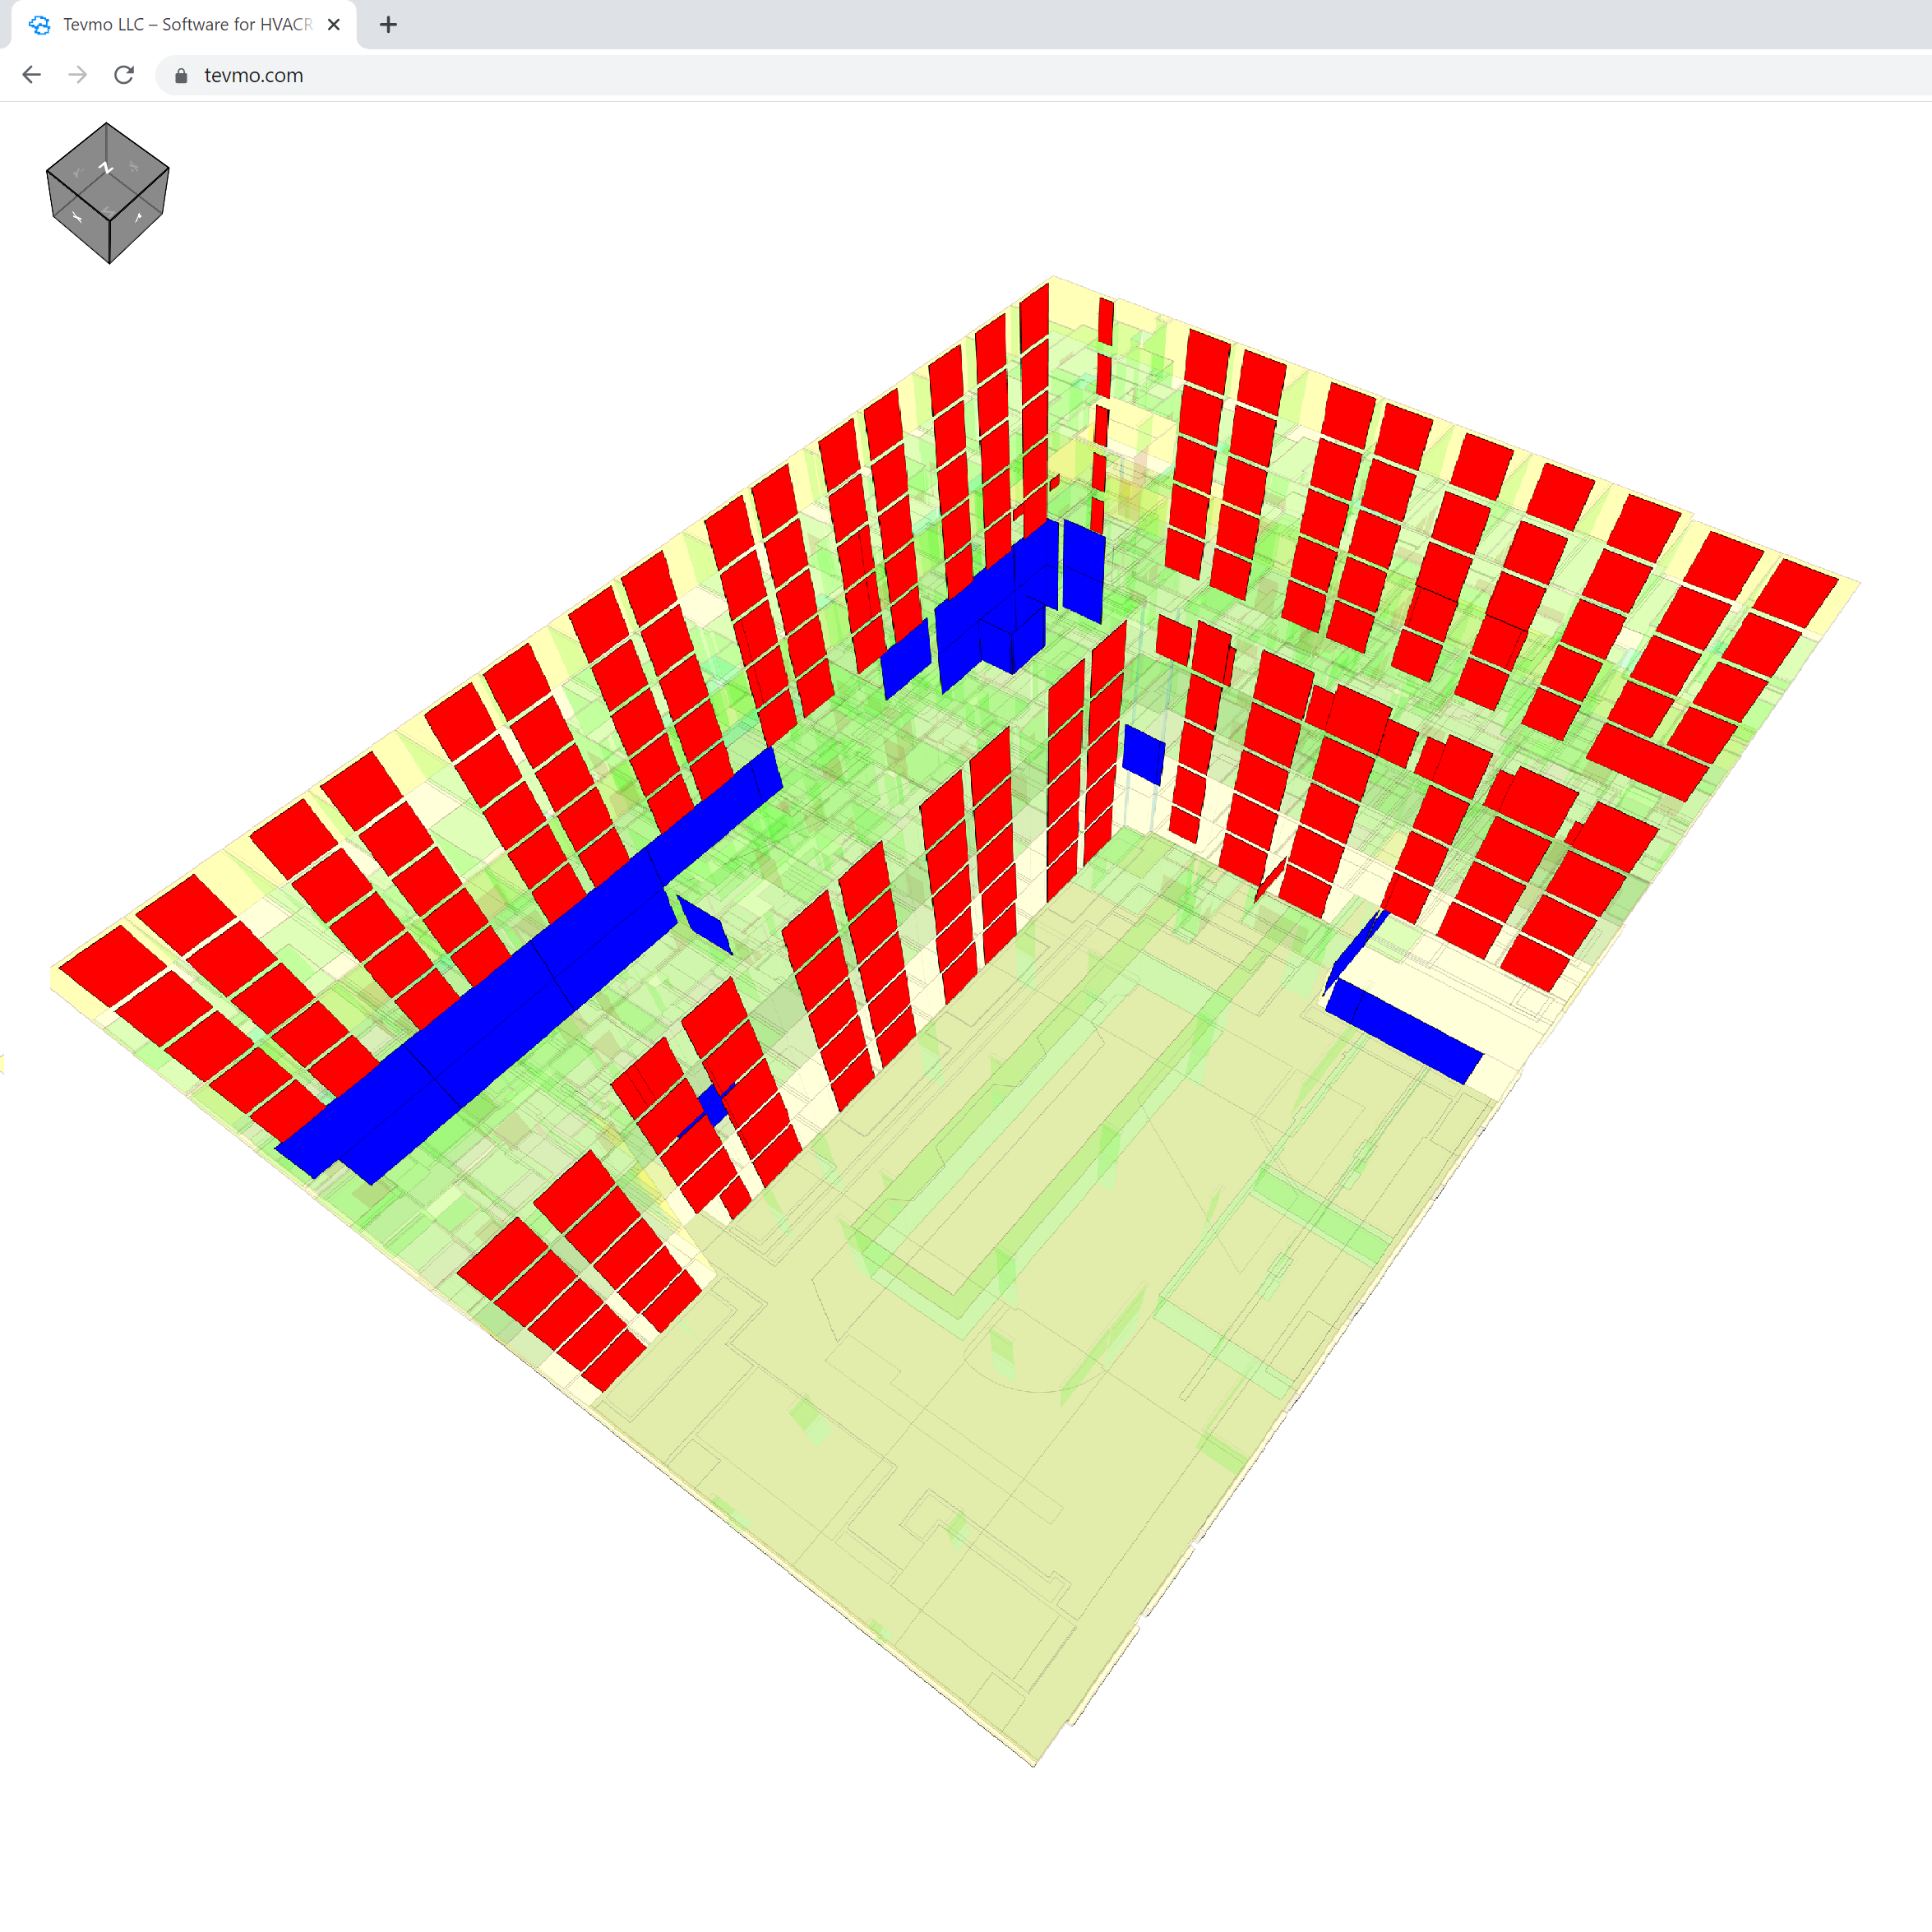 Easily match Revit surfaces types with your surfaces types, quickly check the correctness.